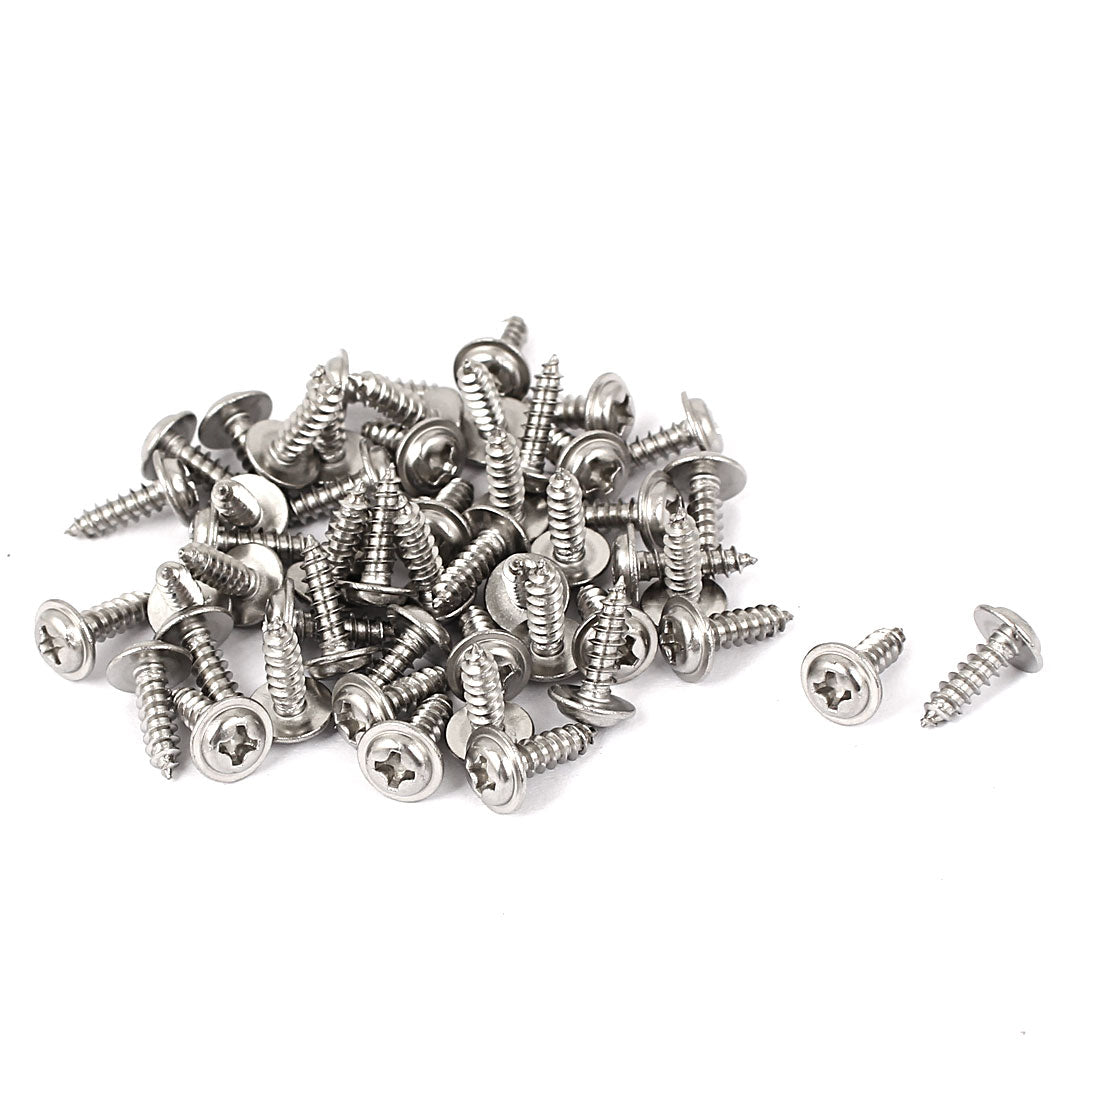 uxcell Uxcell 3mmx10mm Stainless Steel Phillips Flat  Sheet Self Tapping Screws 50 Pcs